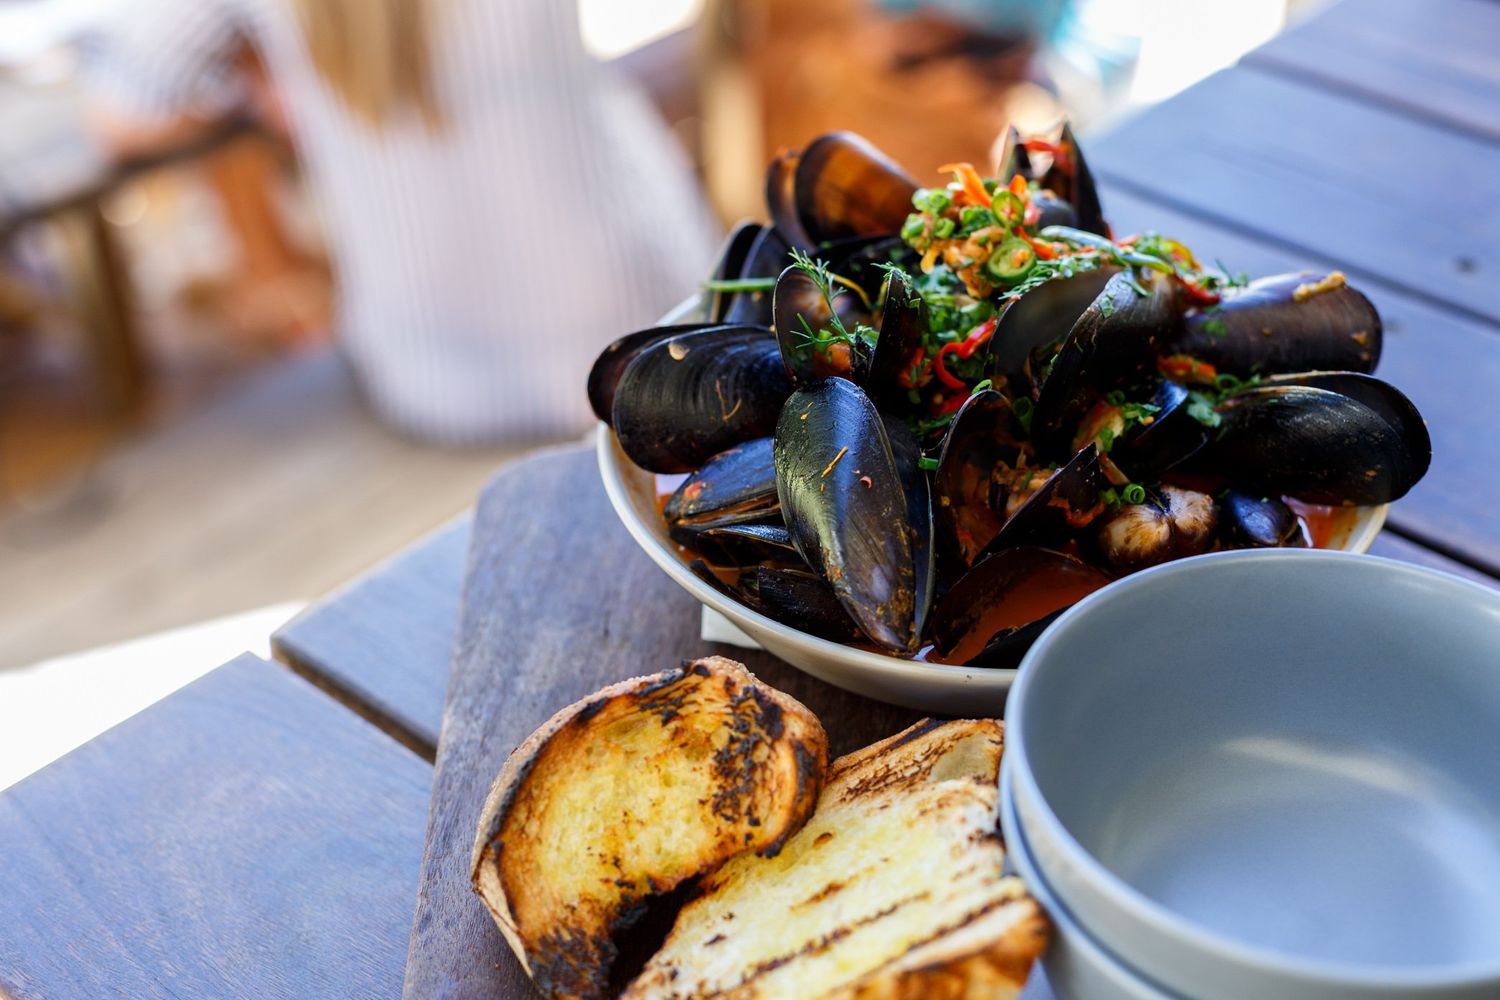 Mussels at Brewhouse Margaret River. Credit Jessica Wyld.